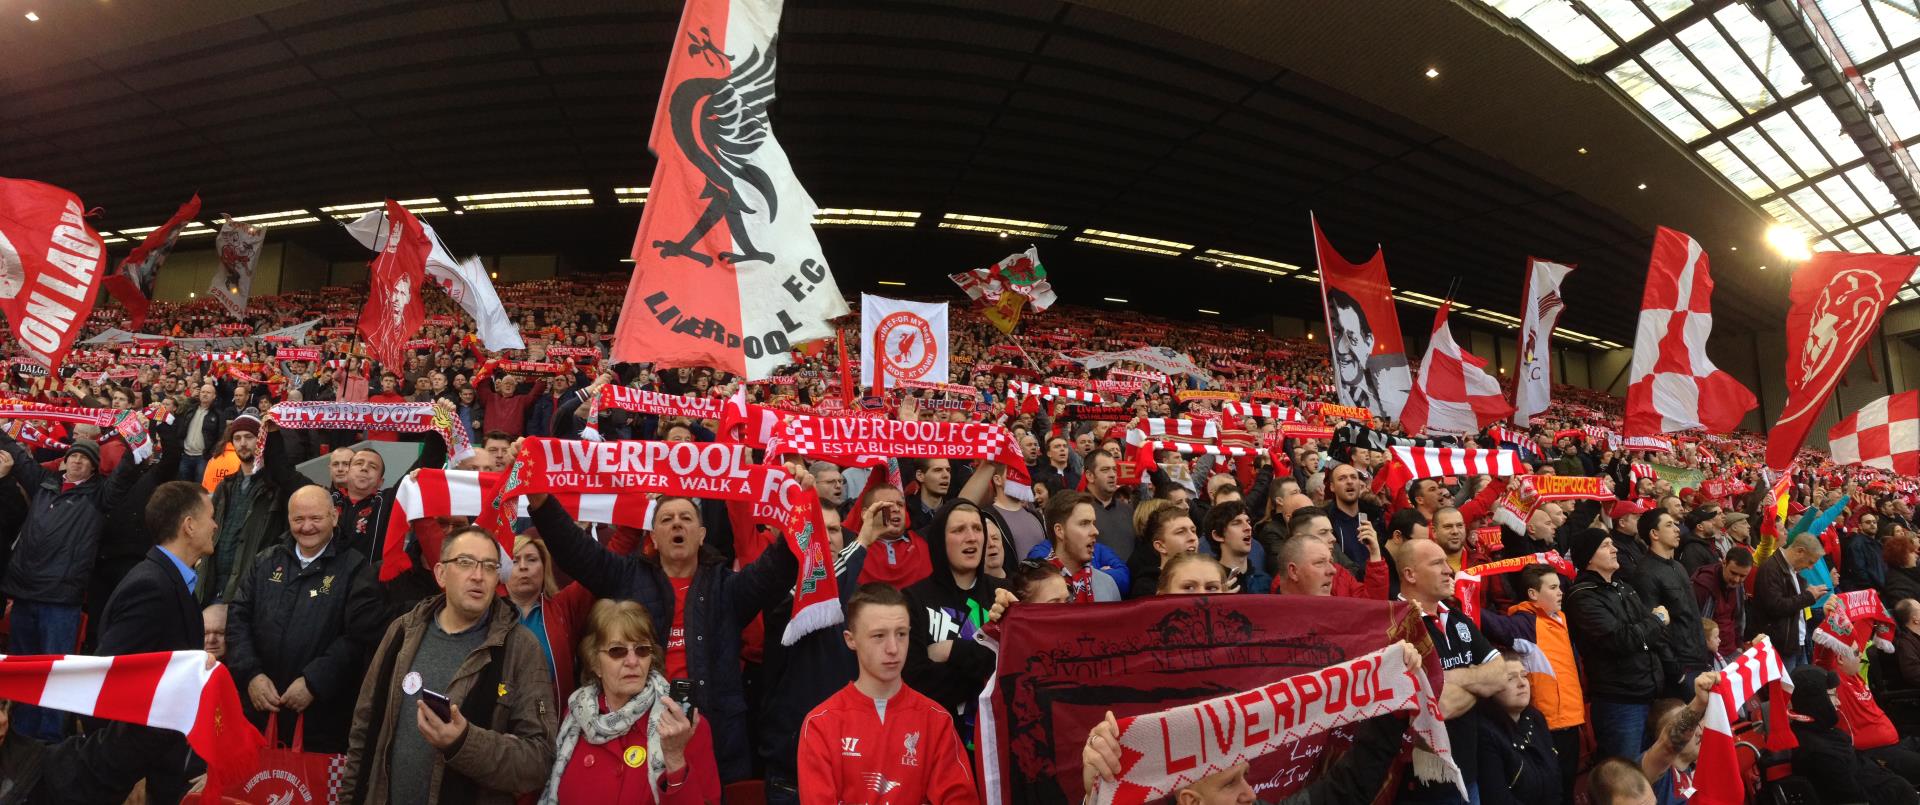 Picture of Liverpool FC - You'll never walk alone at Anfield